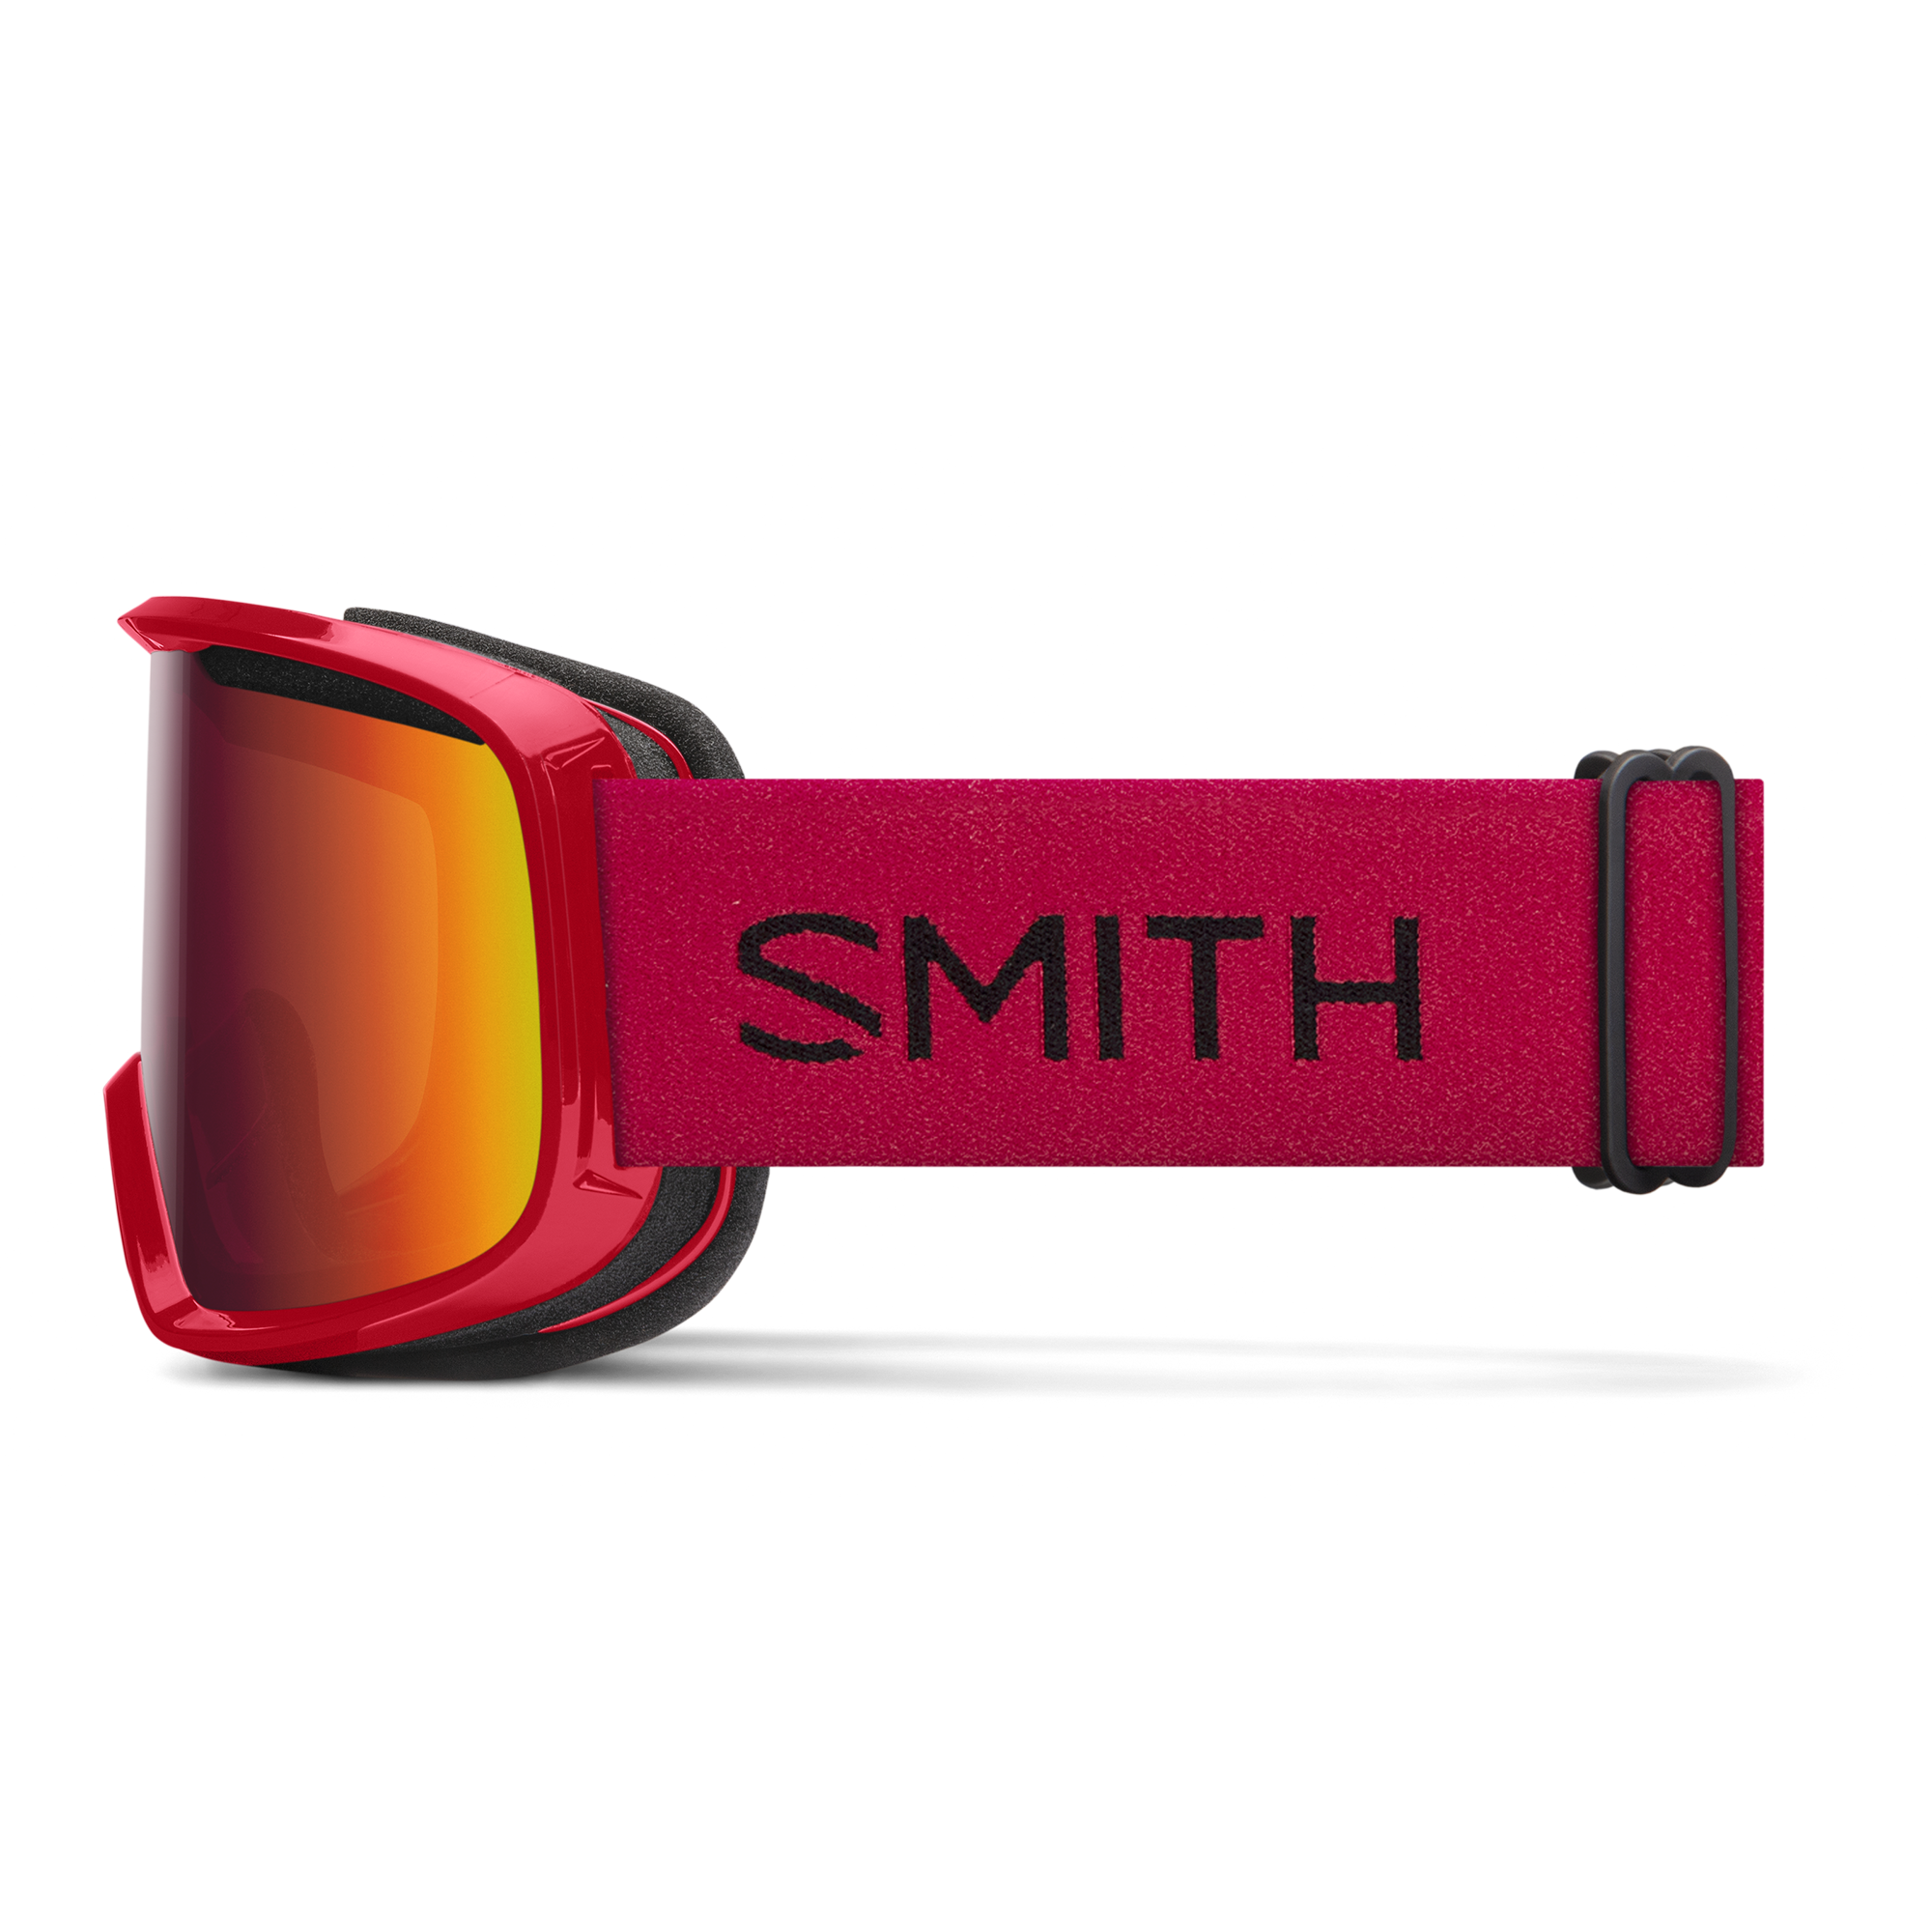 Frontier Snow Goggles